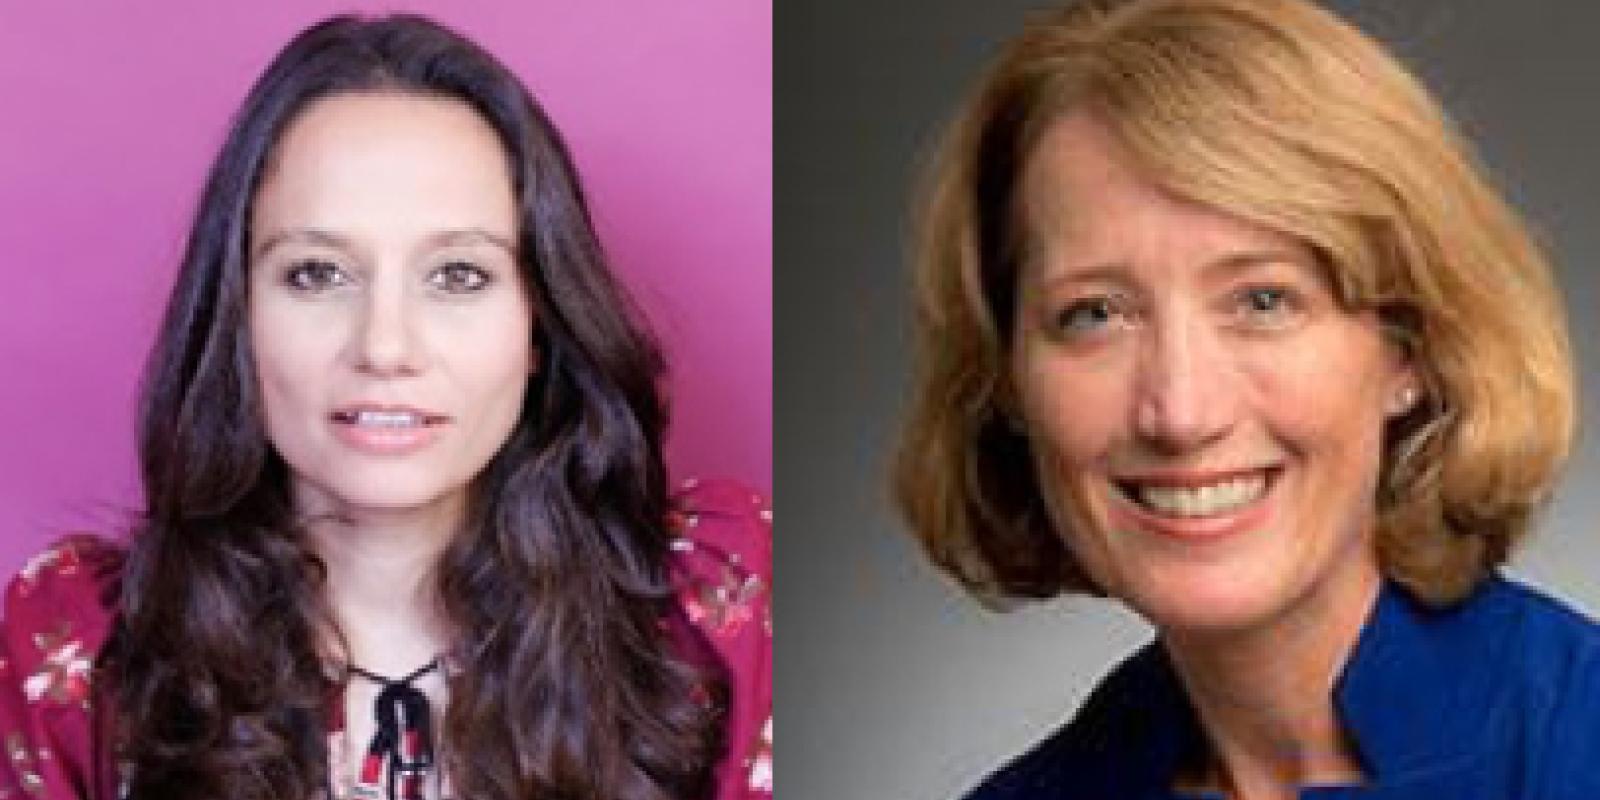 Nora Abousteit ’00, founder and CEO of social-crafting business CraftJam Inc., and Kristin Lord, president and CEO of the global development and education nonprofit IREX, are AUC's newest trustees